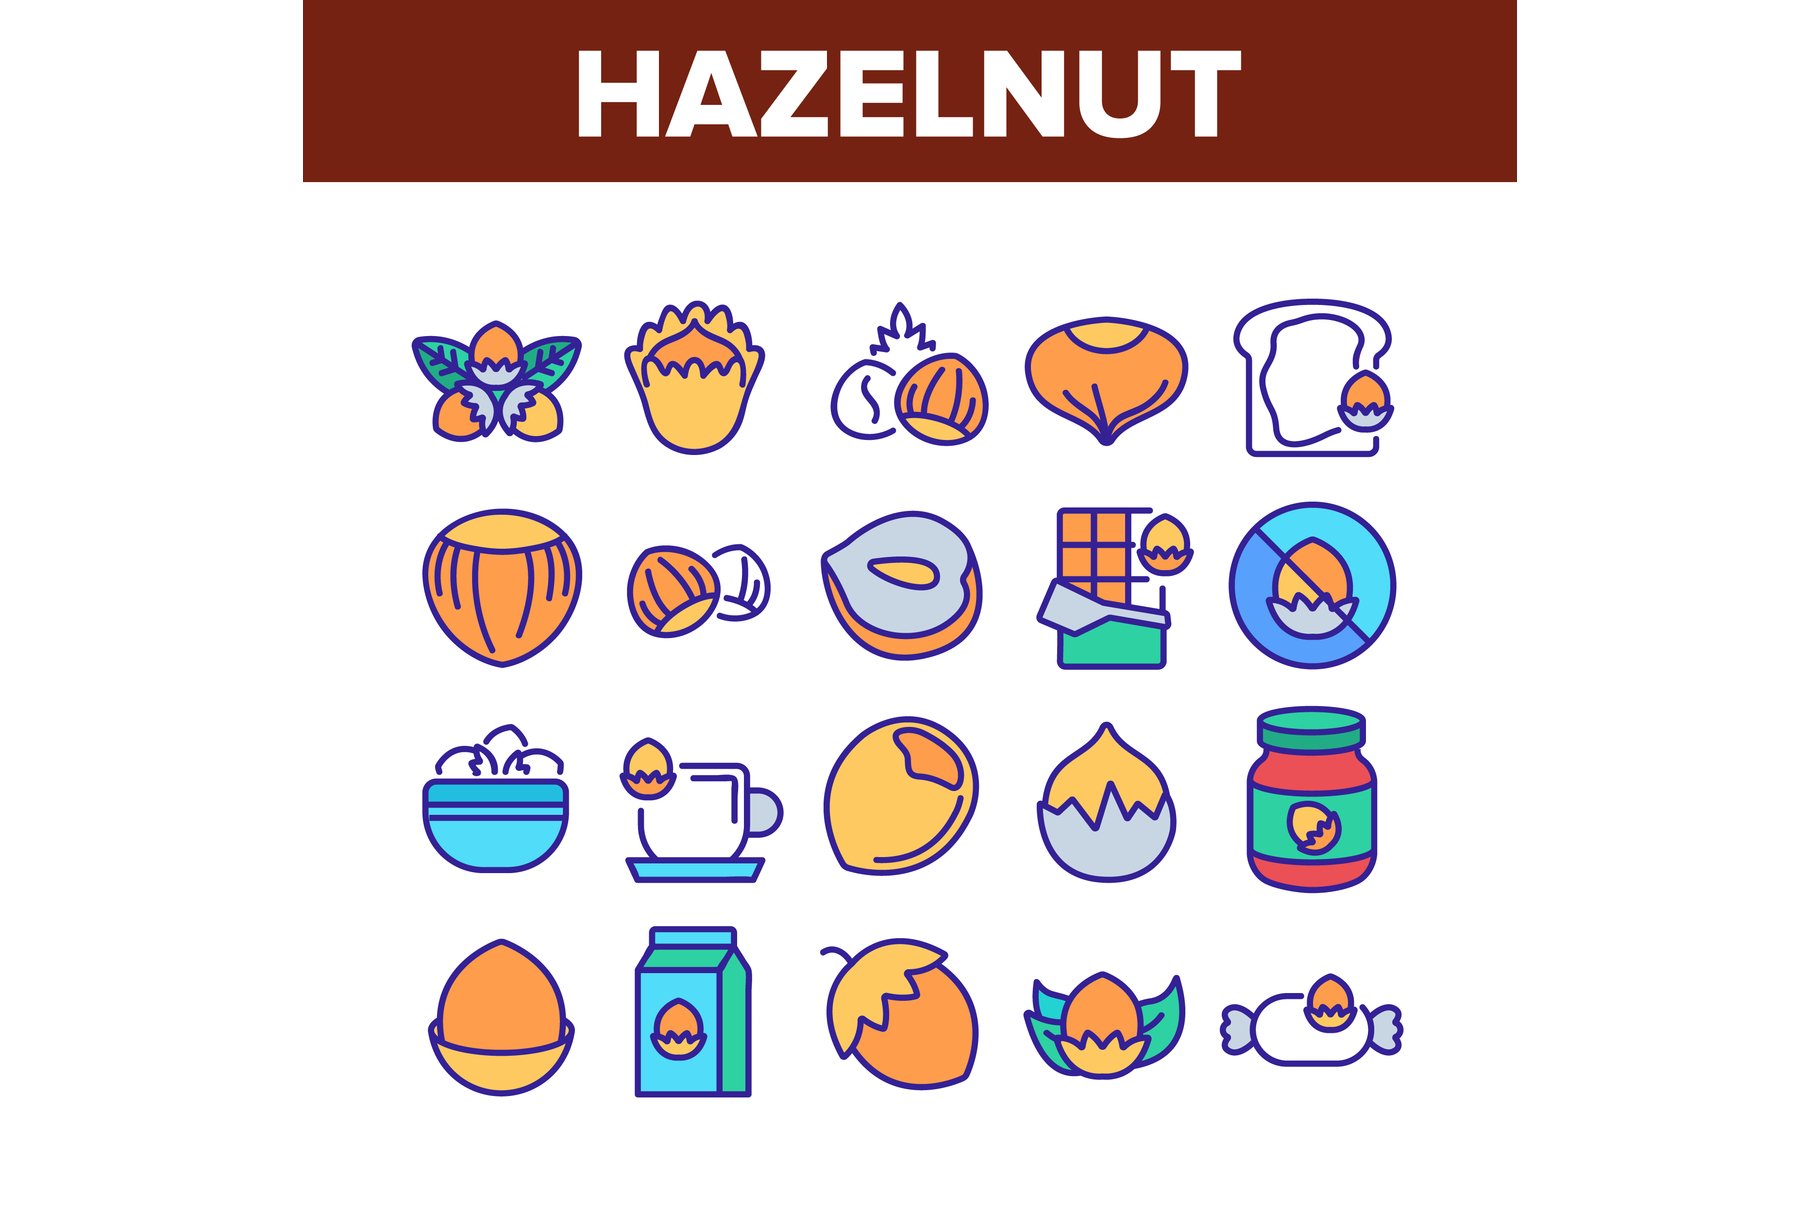 White lettering "Hazelnut" on a brown background a set of 20 different colorful illustrations of a hazelnut on a white background.